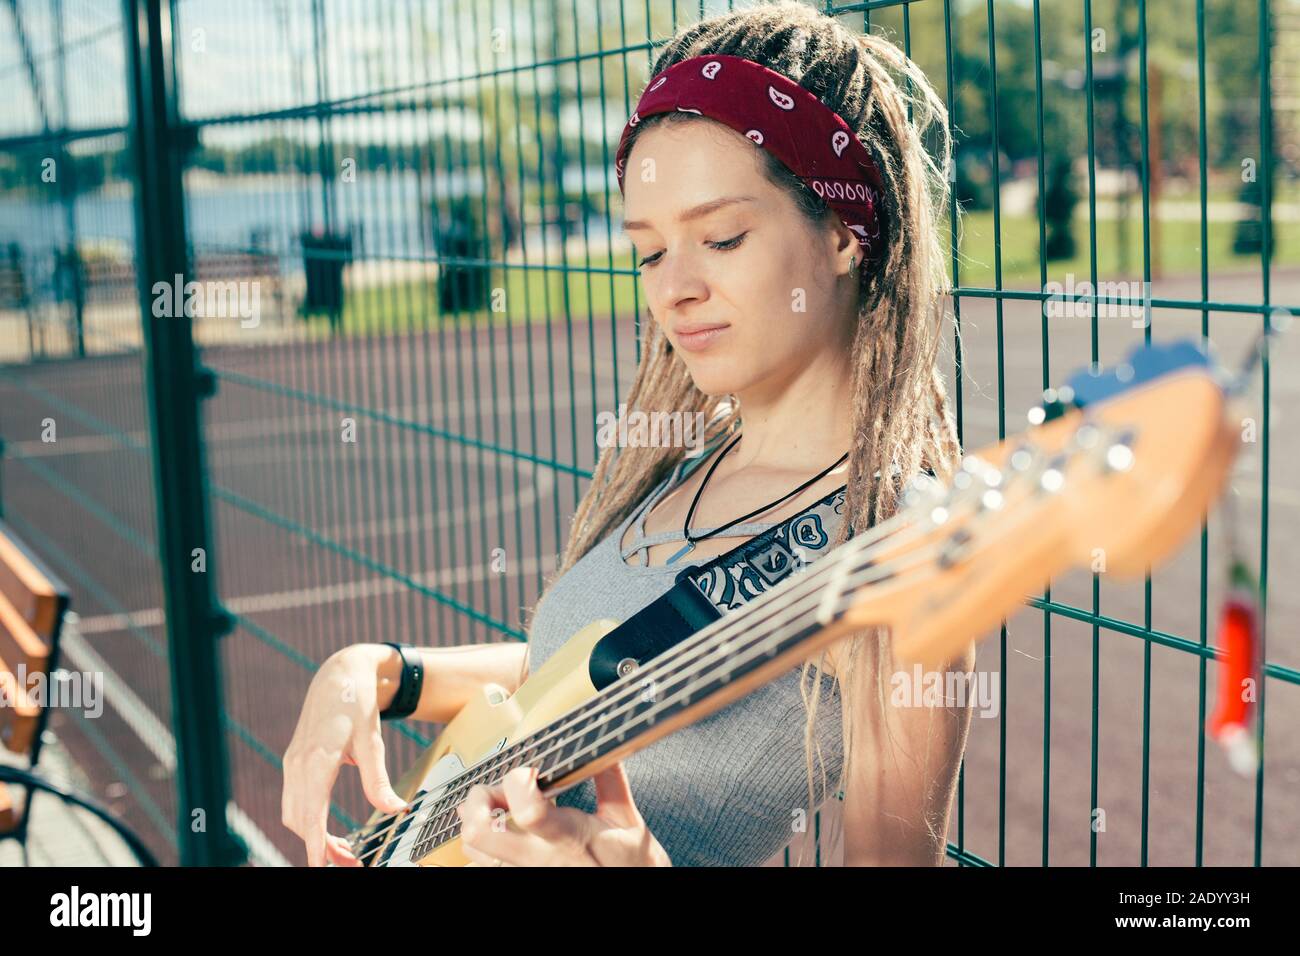 Peaceful musician leaning on the chain link fence and playing the guitar Stock Photo